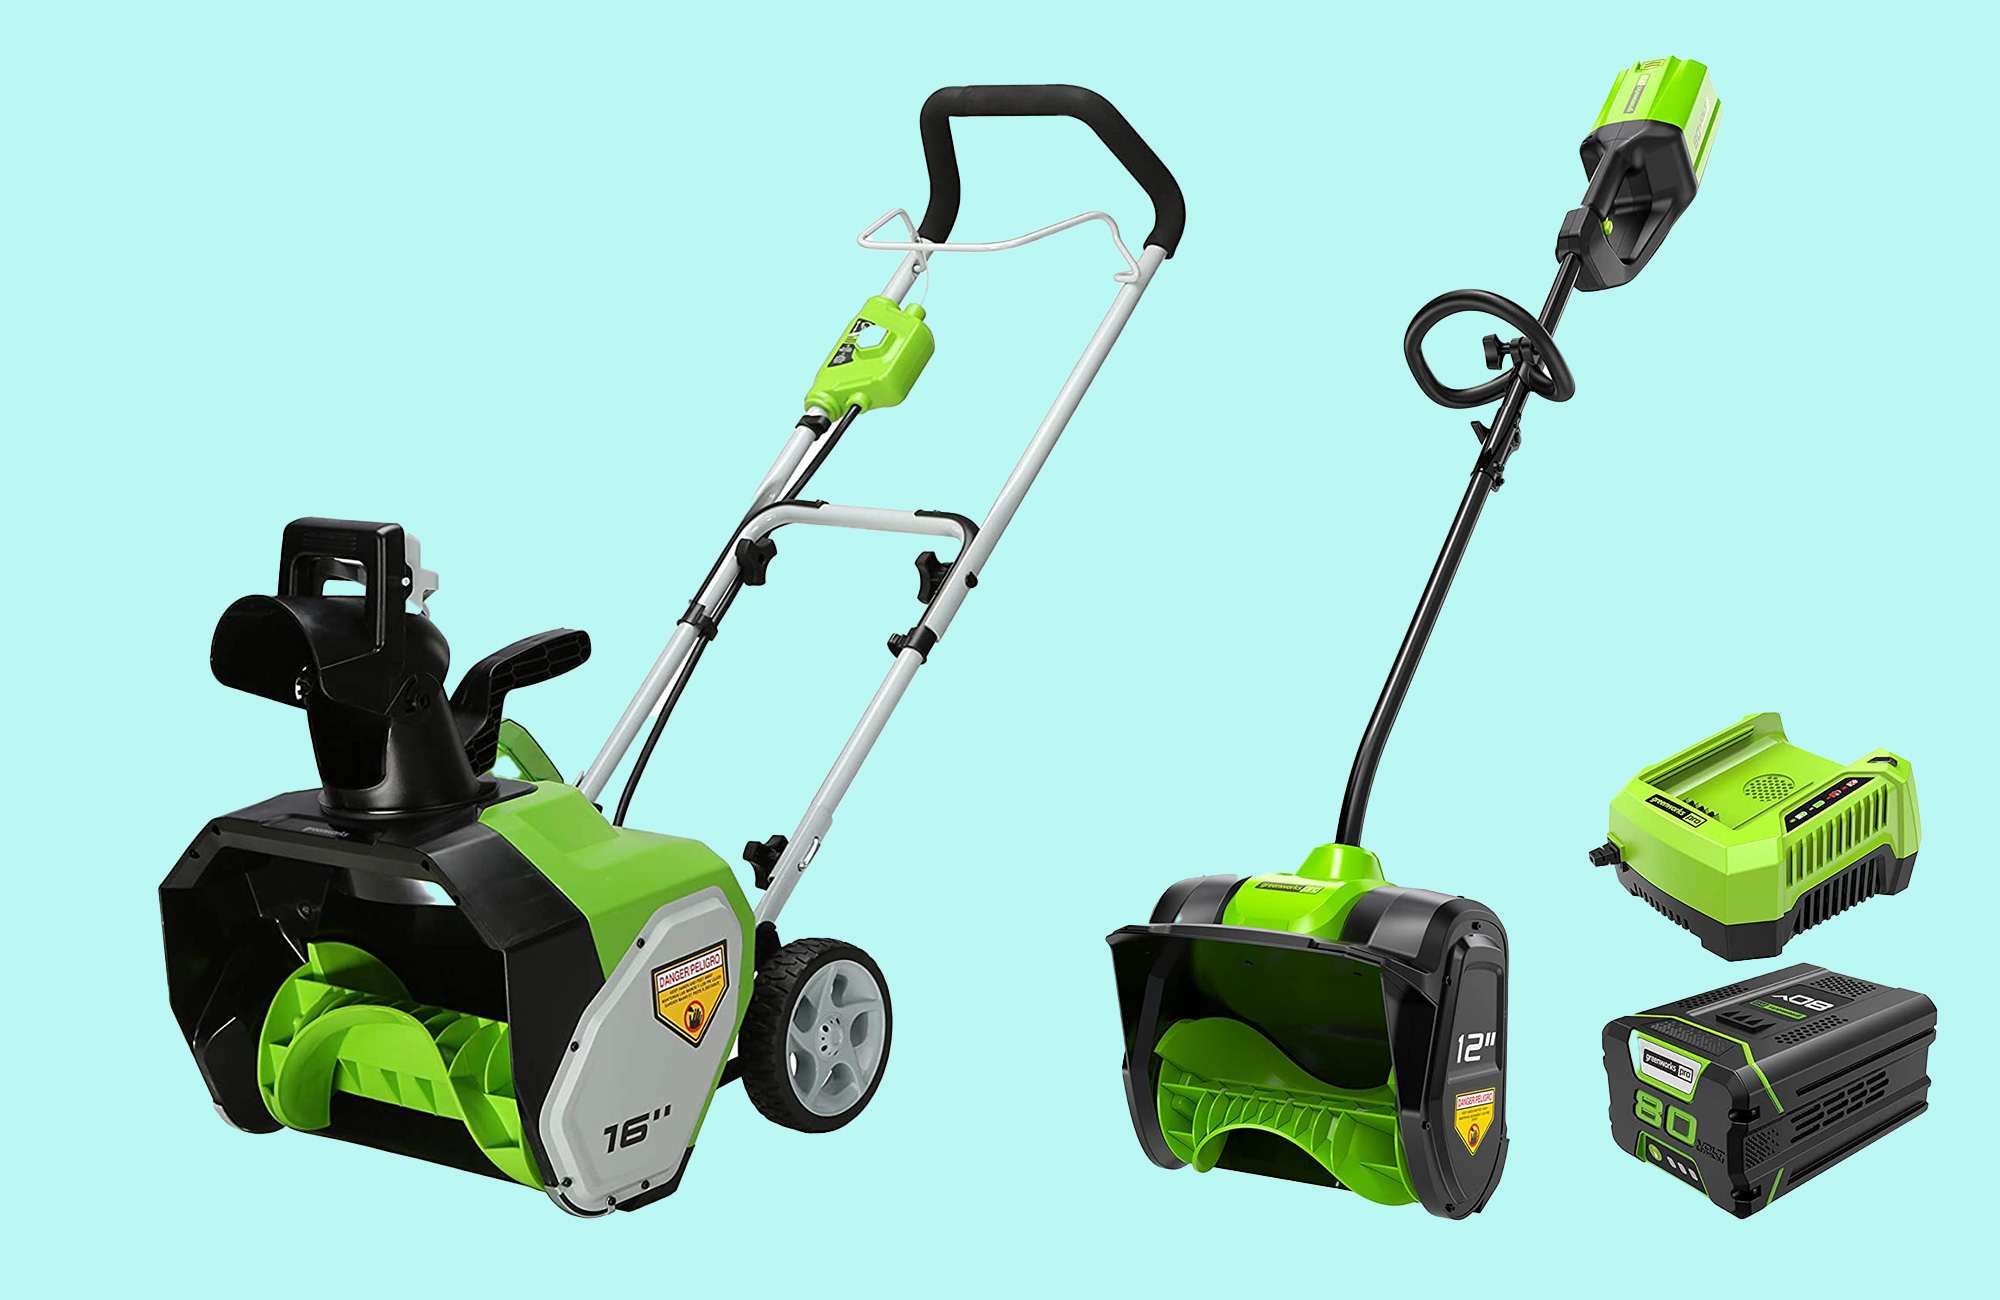 Save up to $250 on Greenworks electric shovels and snow blowers at Amazon